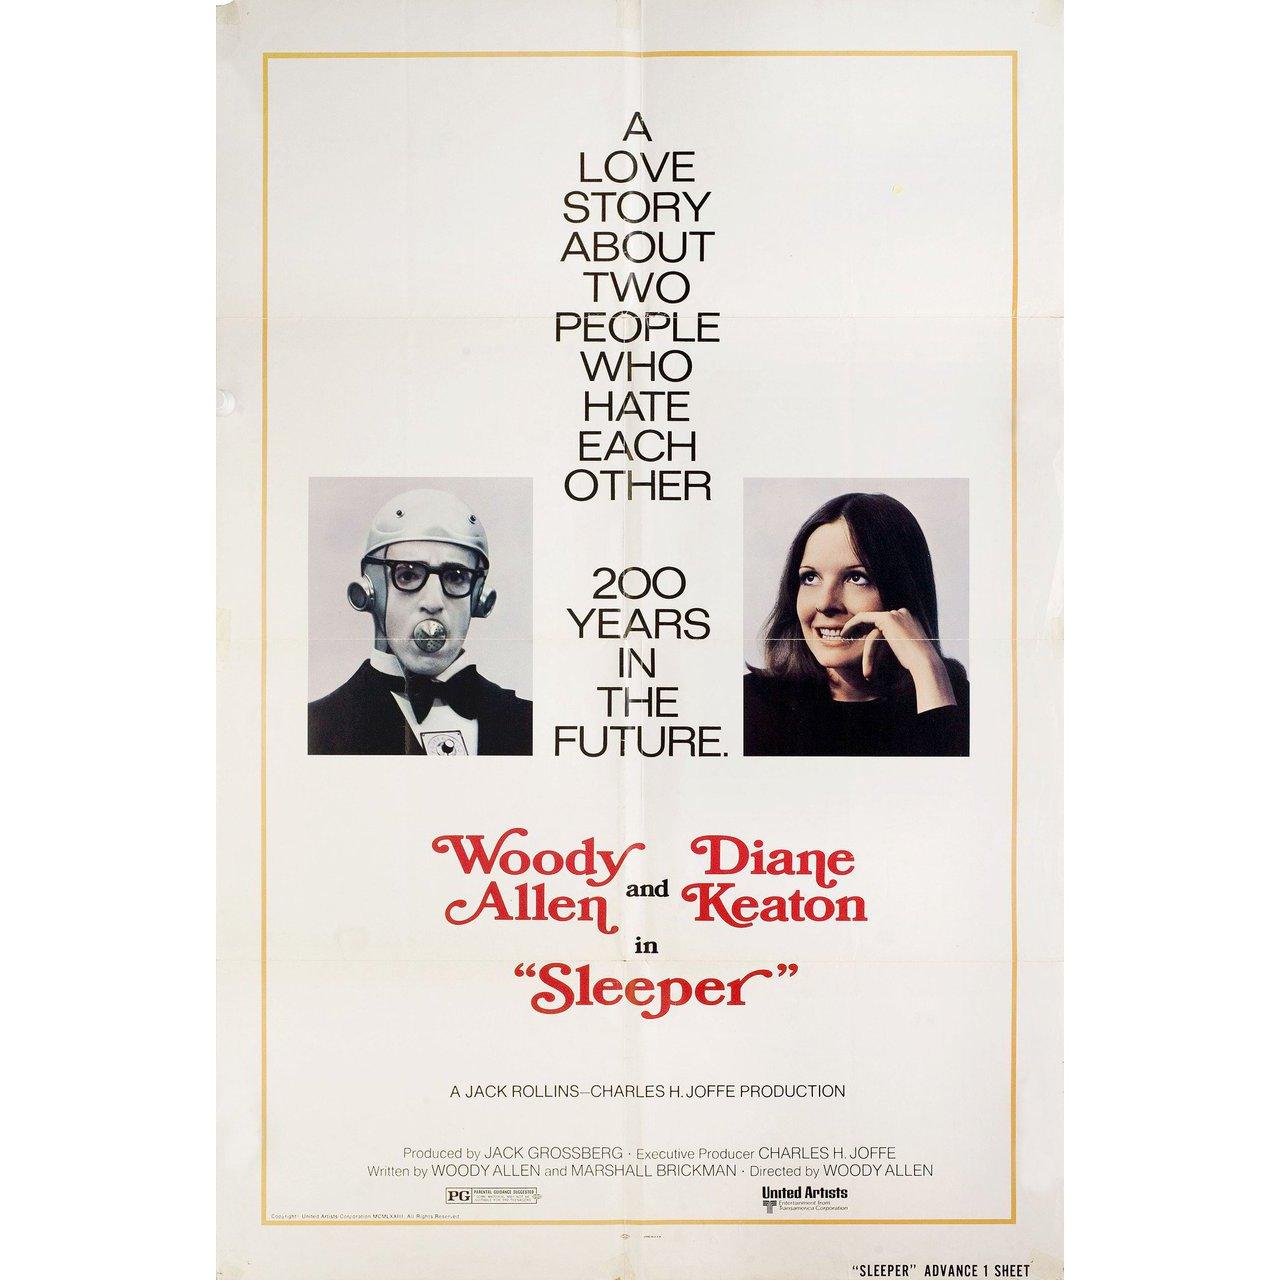 Original 1973 U.S. one sheet poster for the film “Sleeper” directed by Woody Allen with Woody Allen / Diane Keaton / John Beck / Mary Gregory. Very good condition, folded. Many original posters were issued folded or were subsequently folded. Please